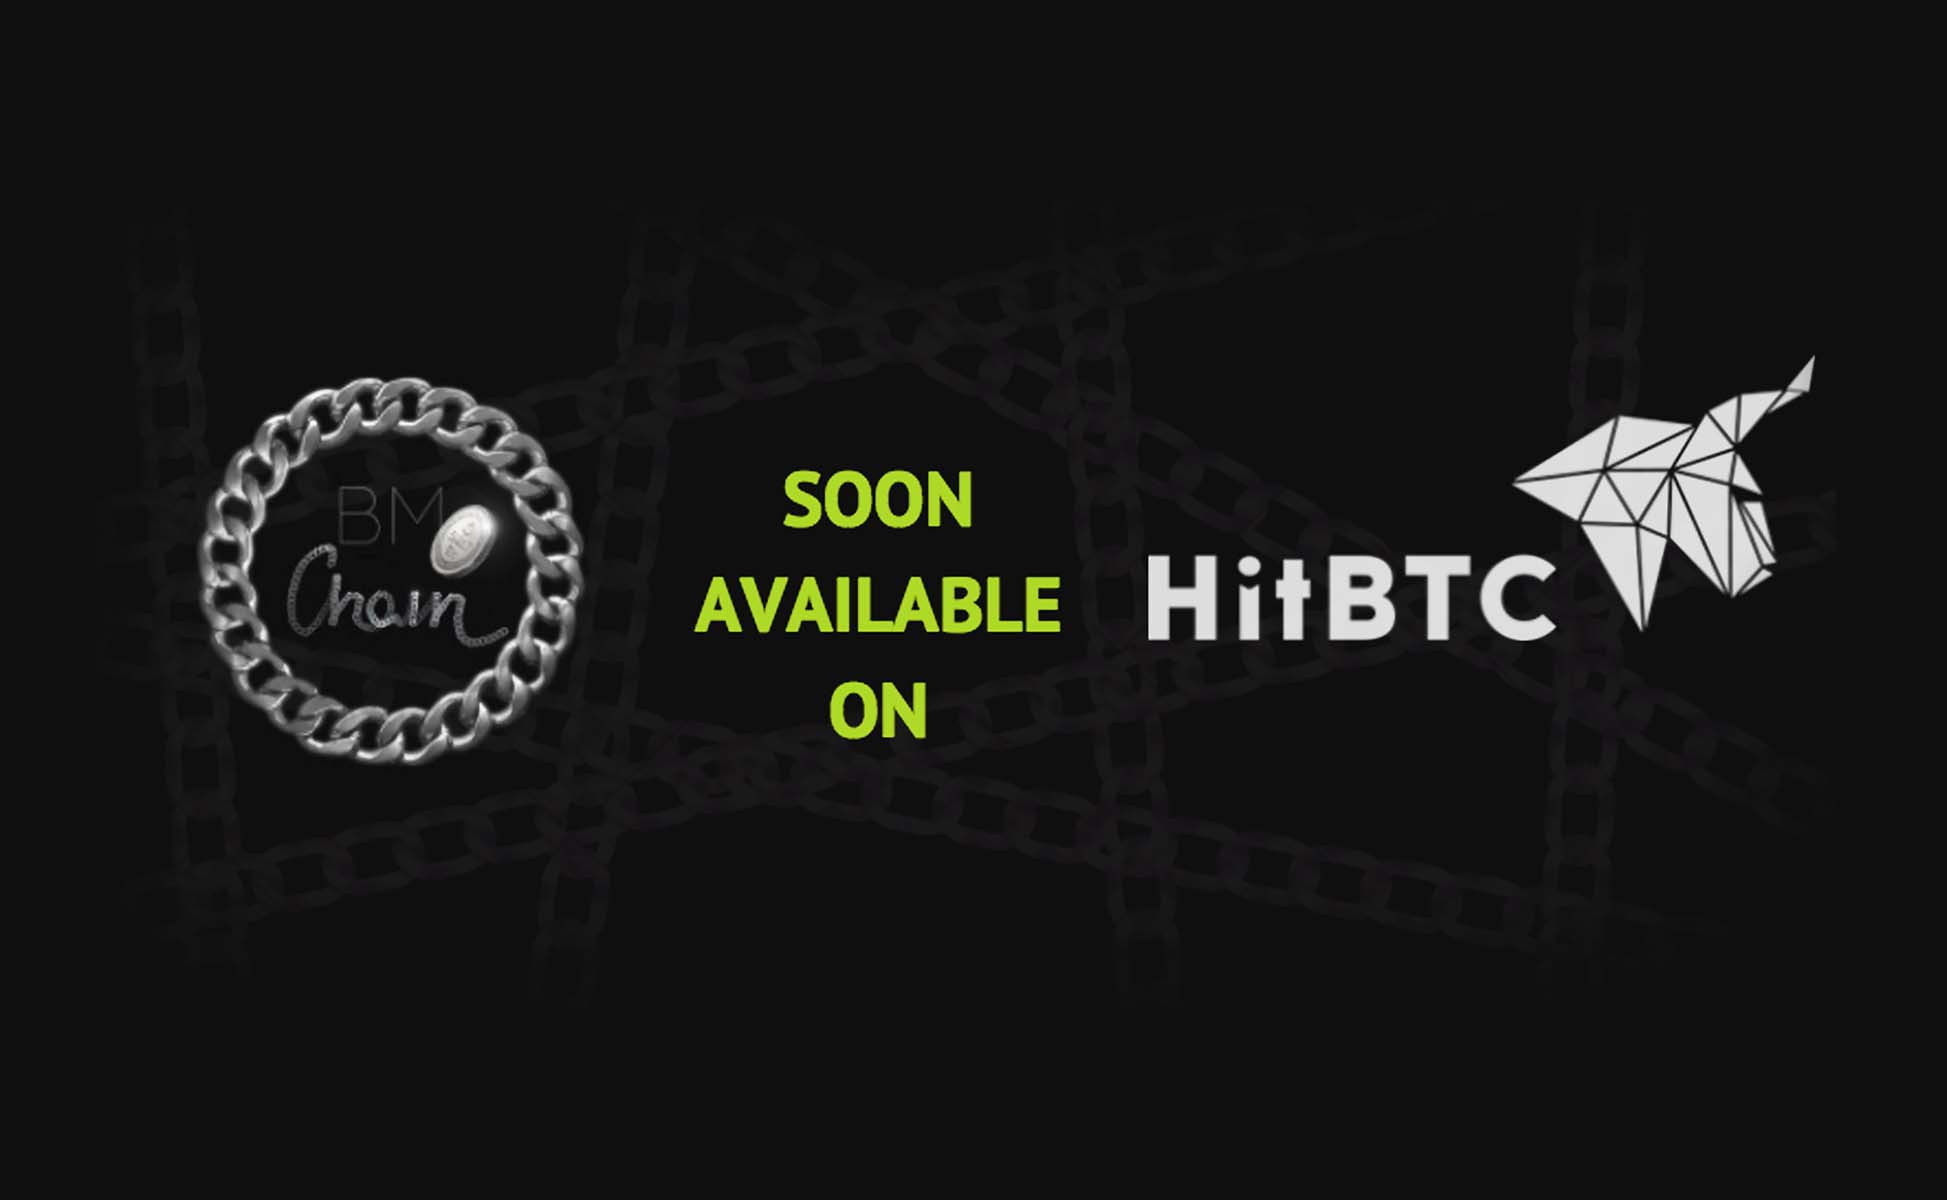 BMCHAIN ICO Ends Today, HitBTC Exchange Listing to Follow